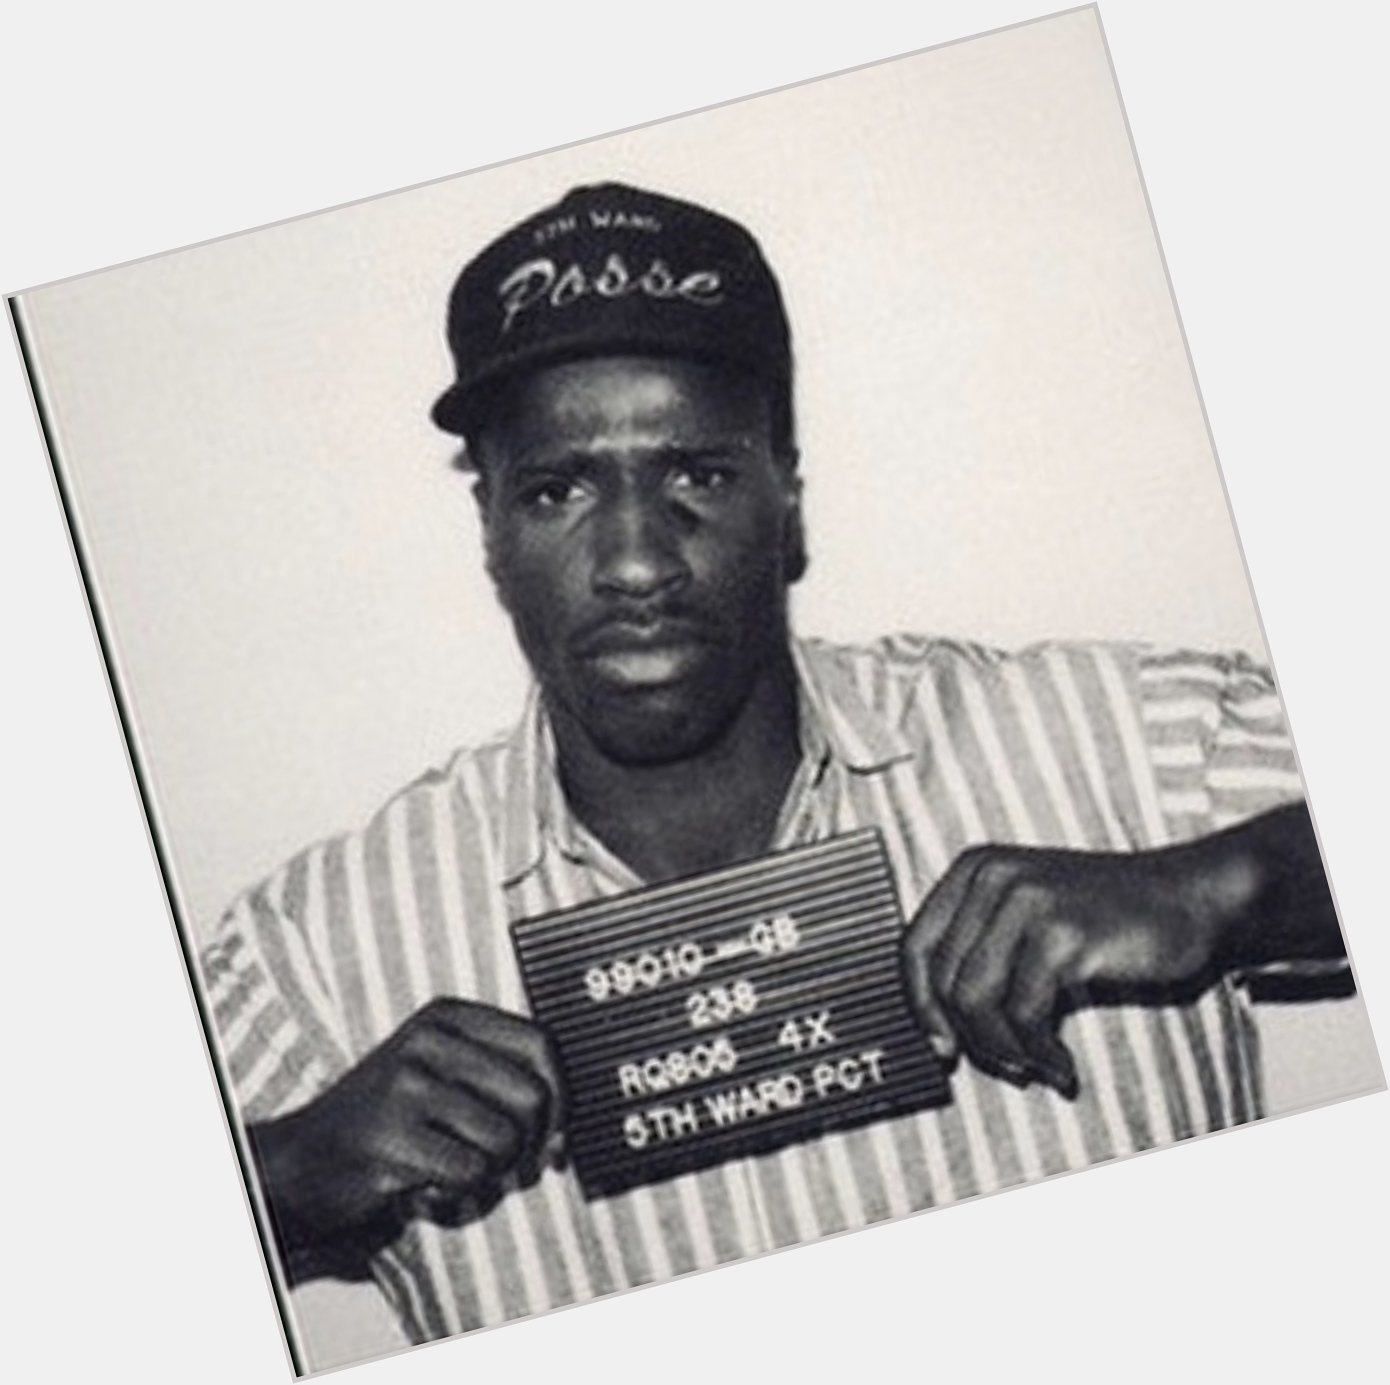 Happy 55th birthday to Willie D from the Geto Boys       